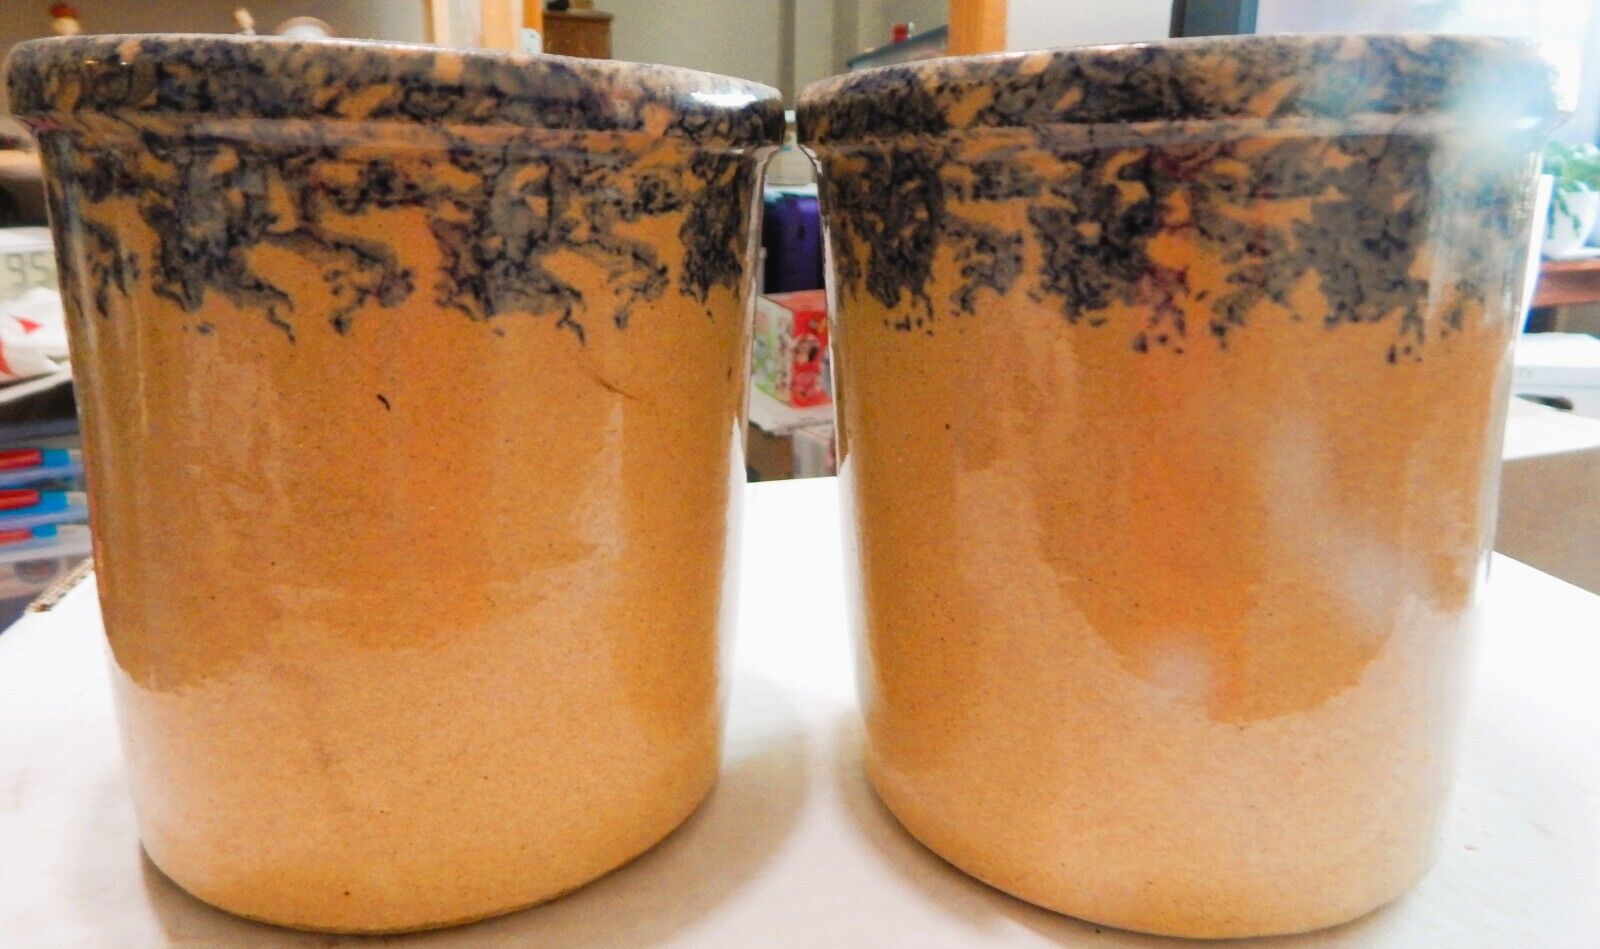 Pair of Jar Potteries for House or Office Use